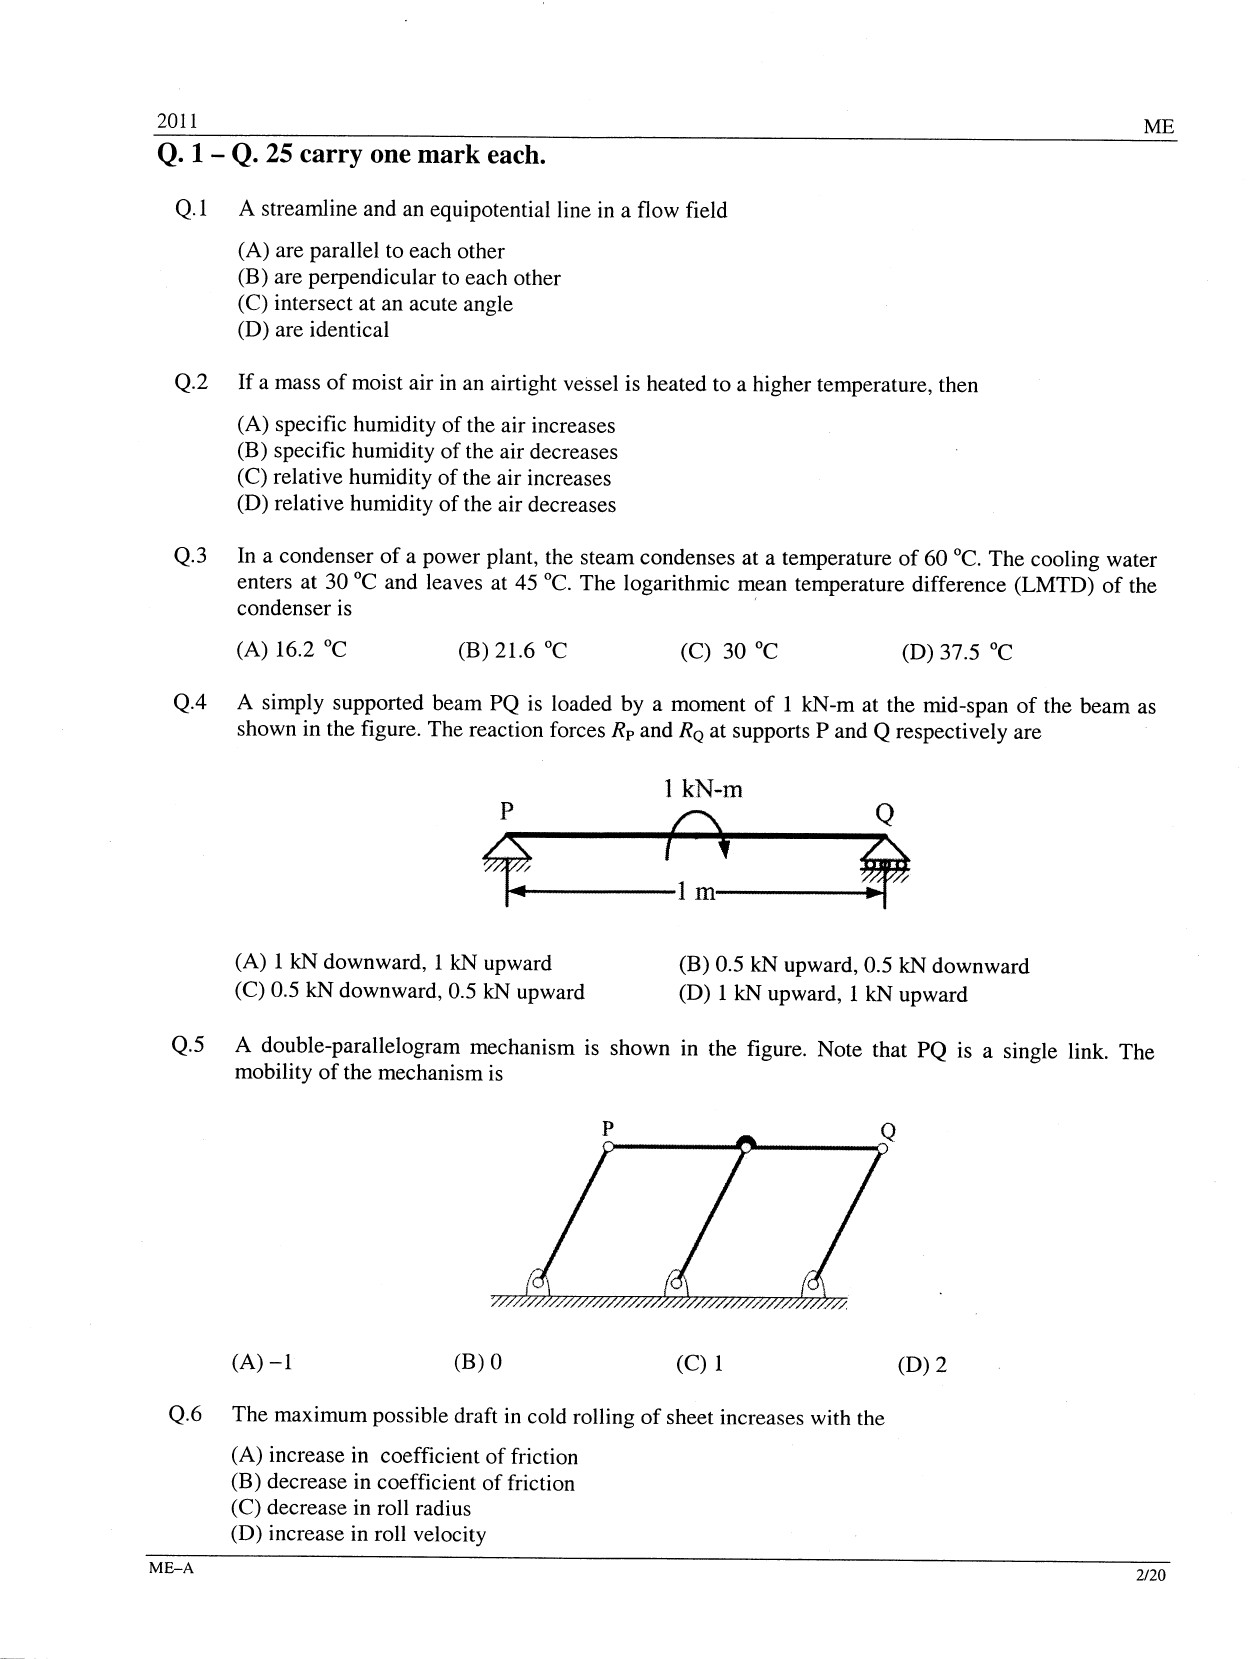 GATE Exam Question Paper 2011 Mechanical Engineering 2